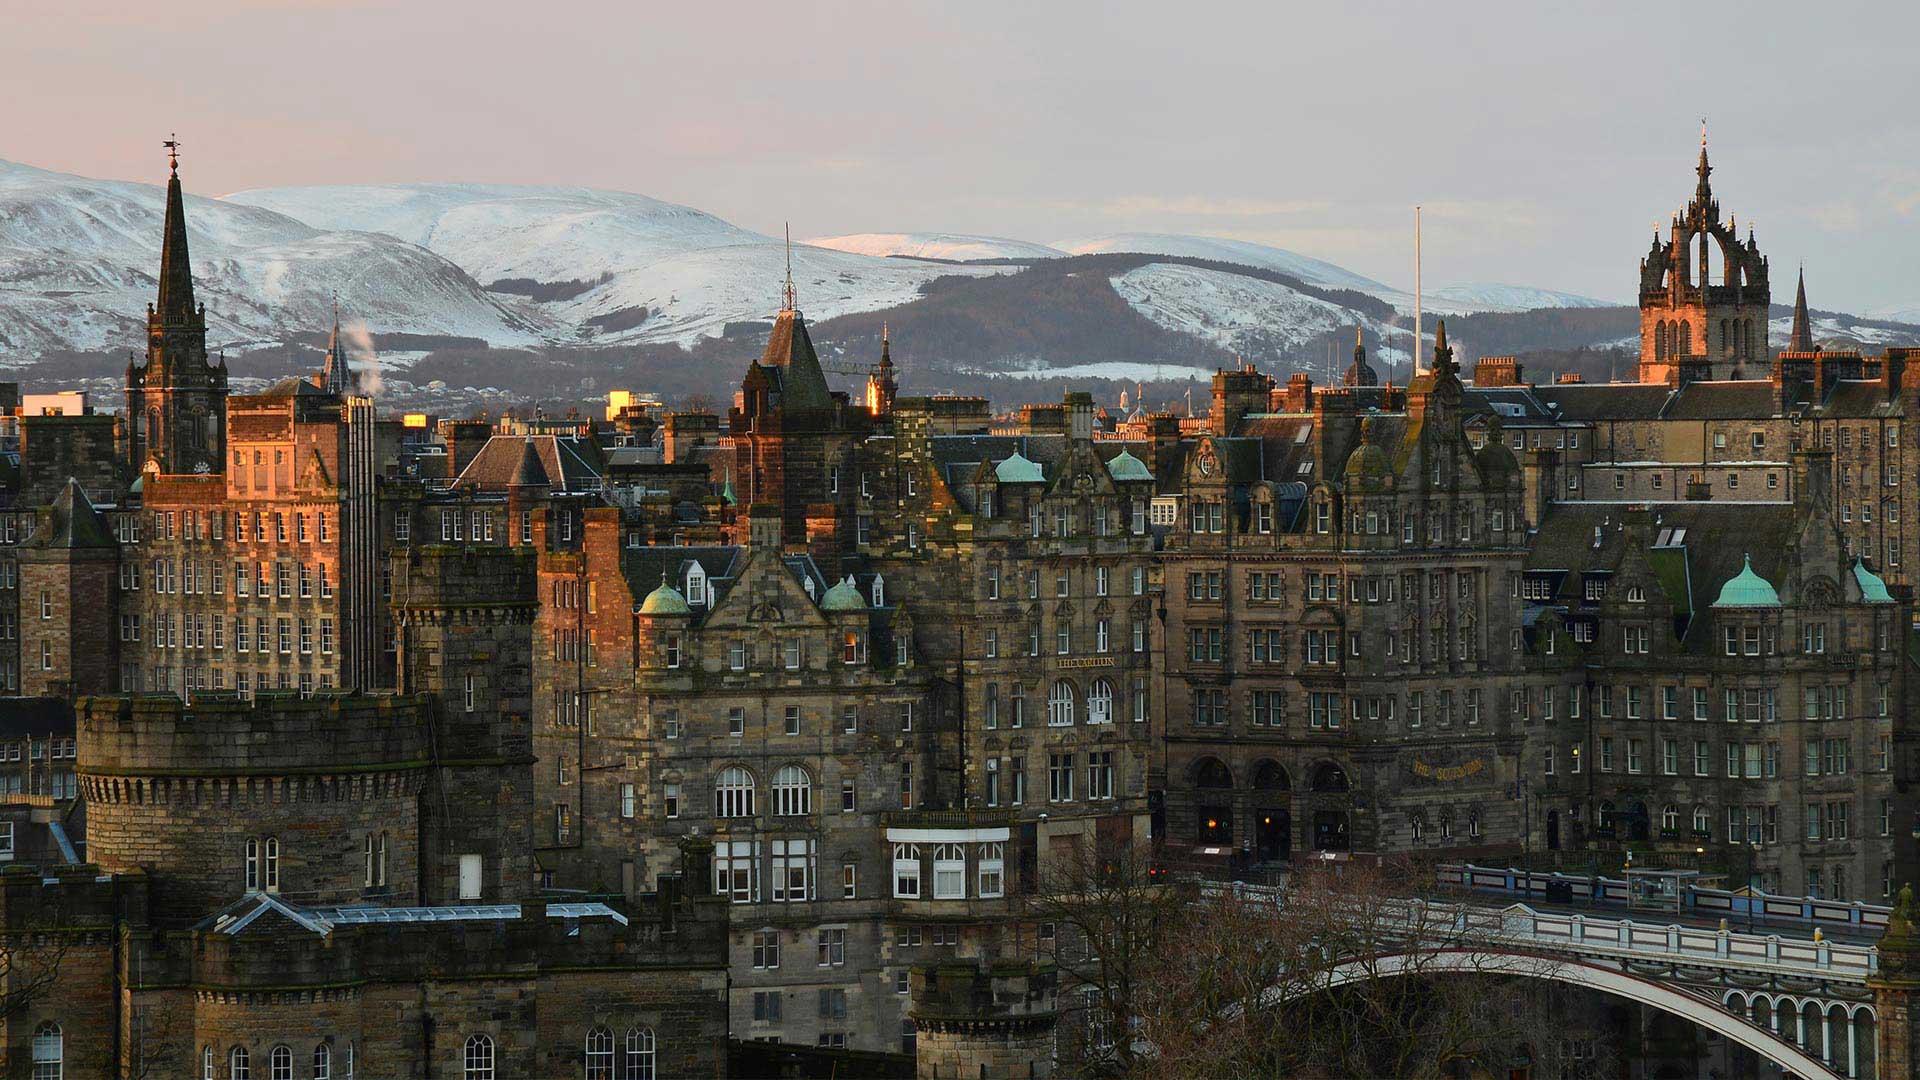 where to visit scotland in december